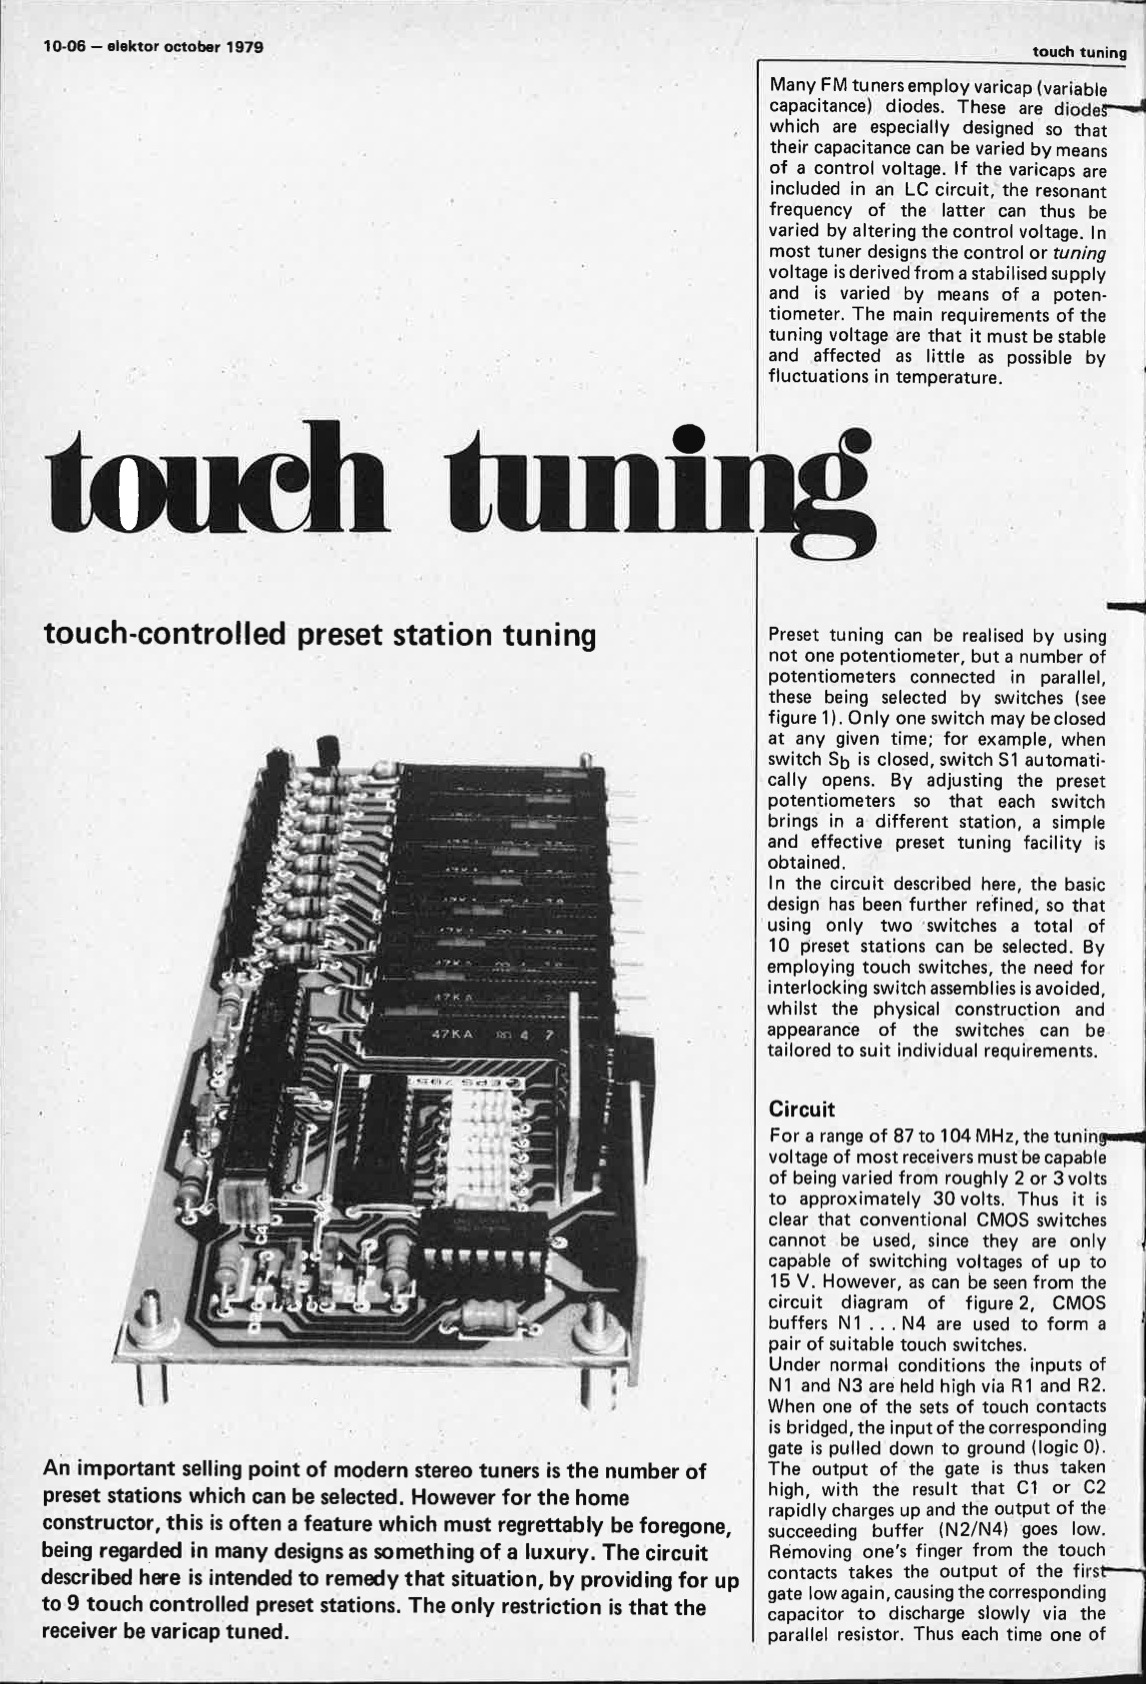 touch tuning